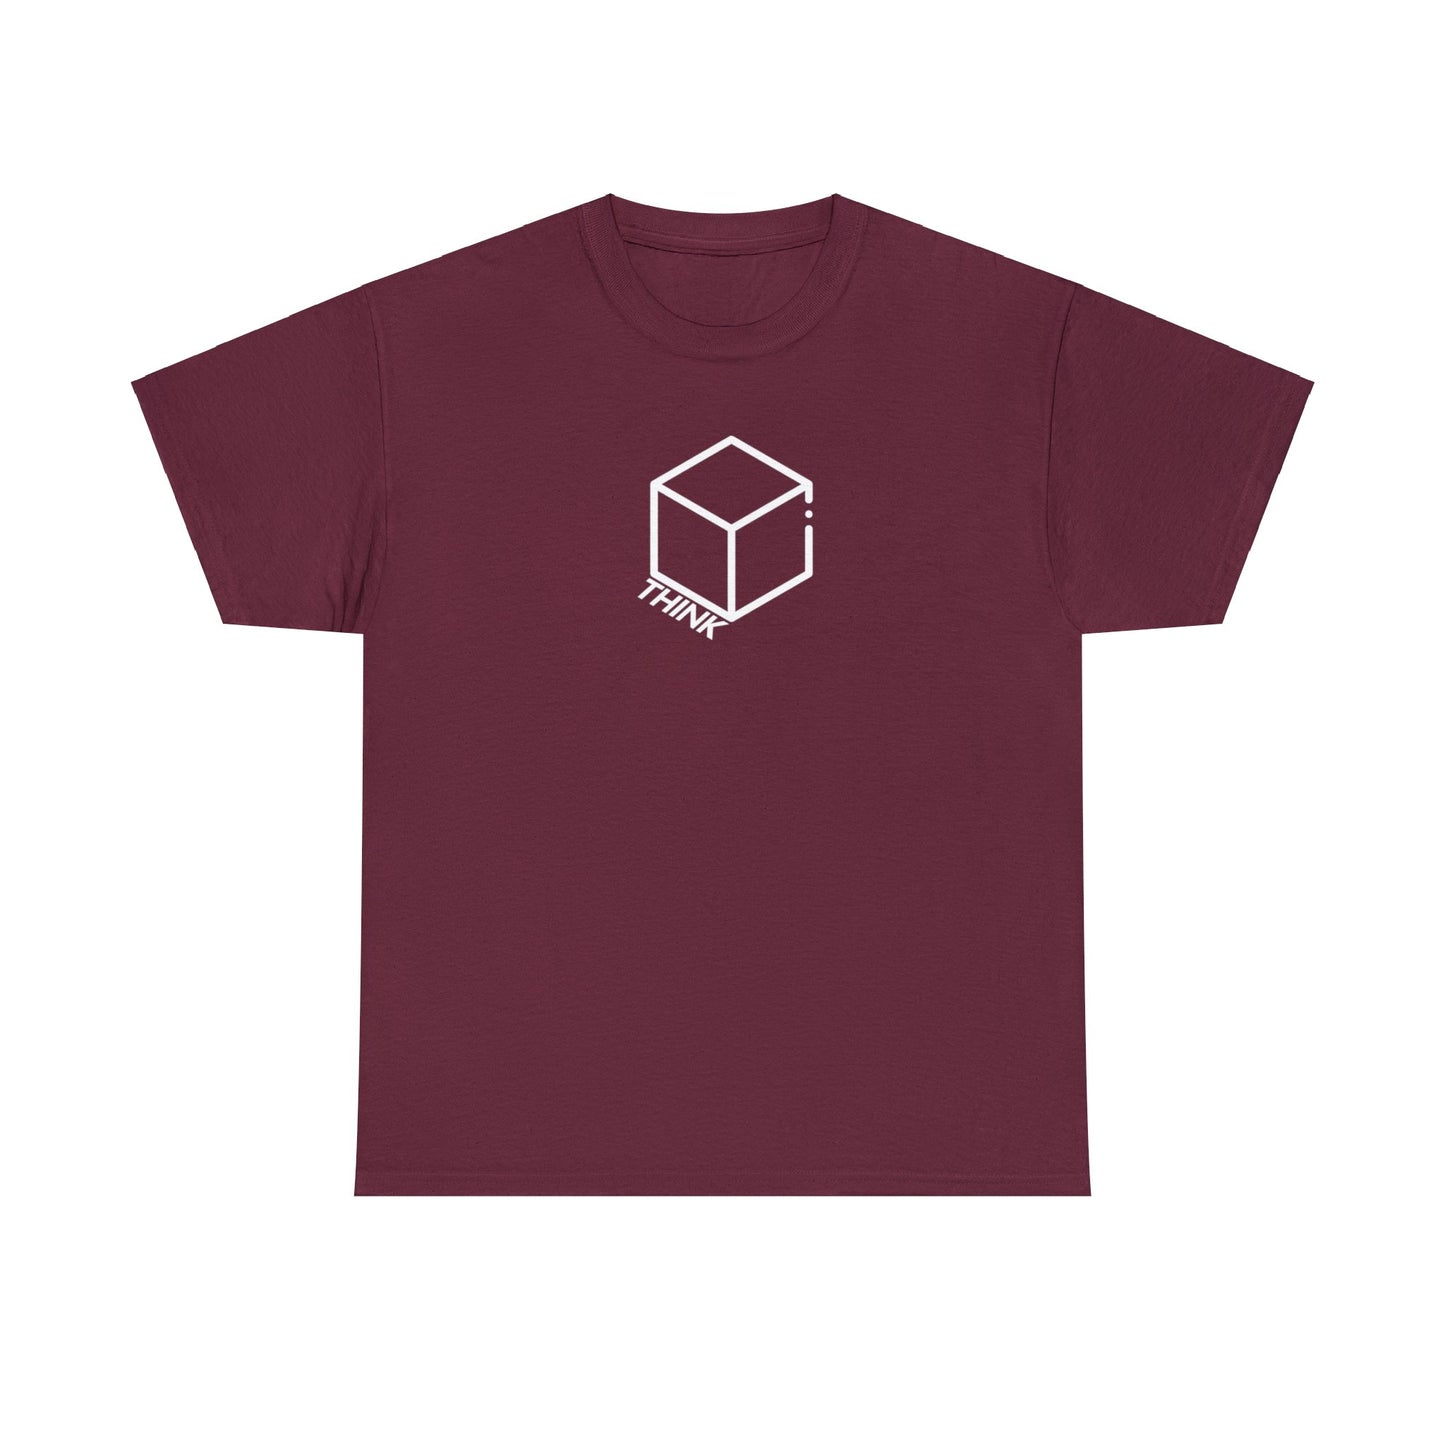 Out of the Box Cotton Tee